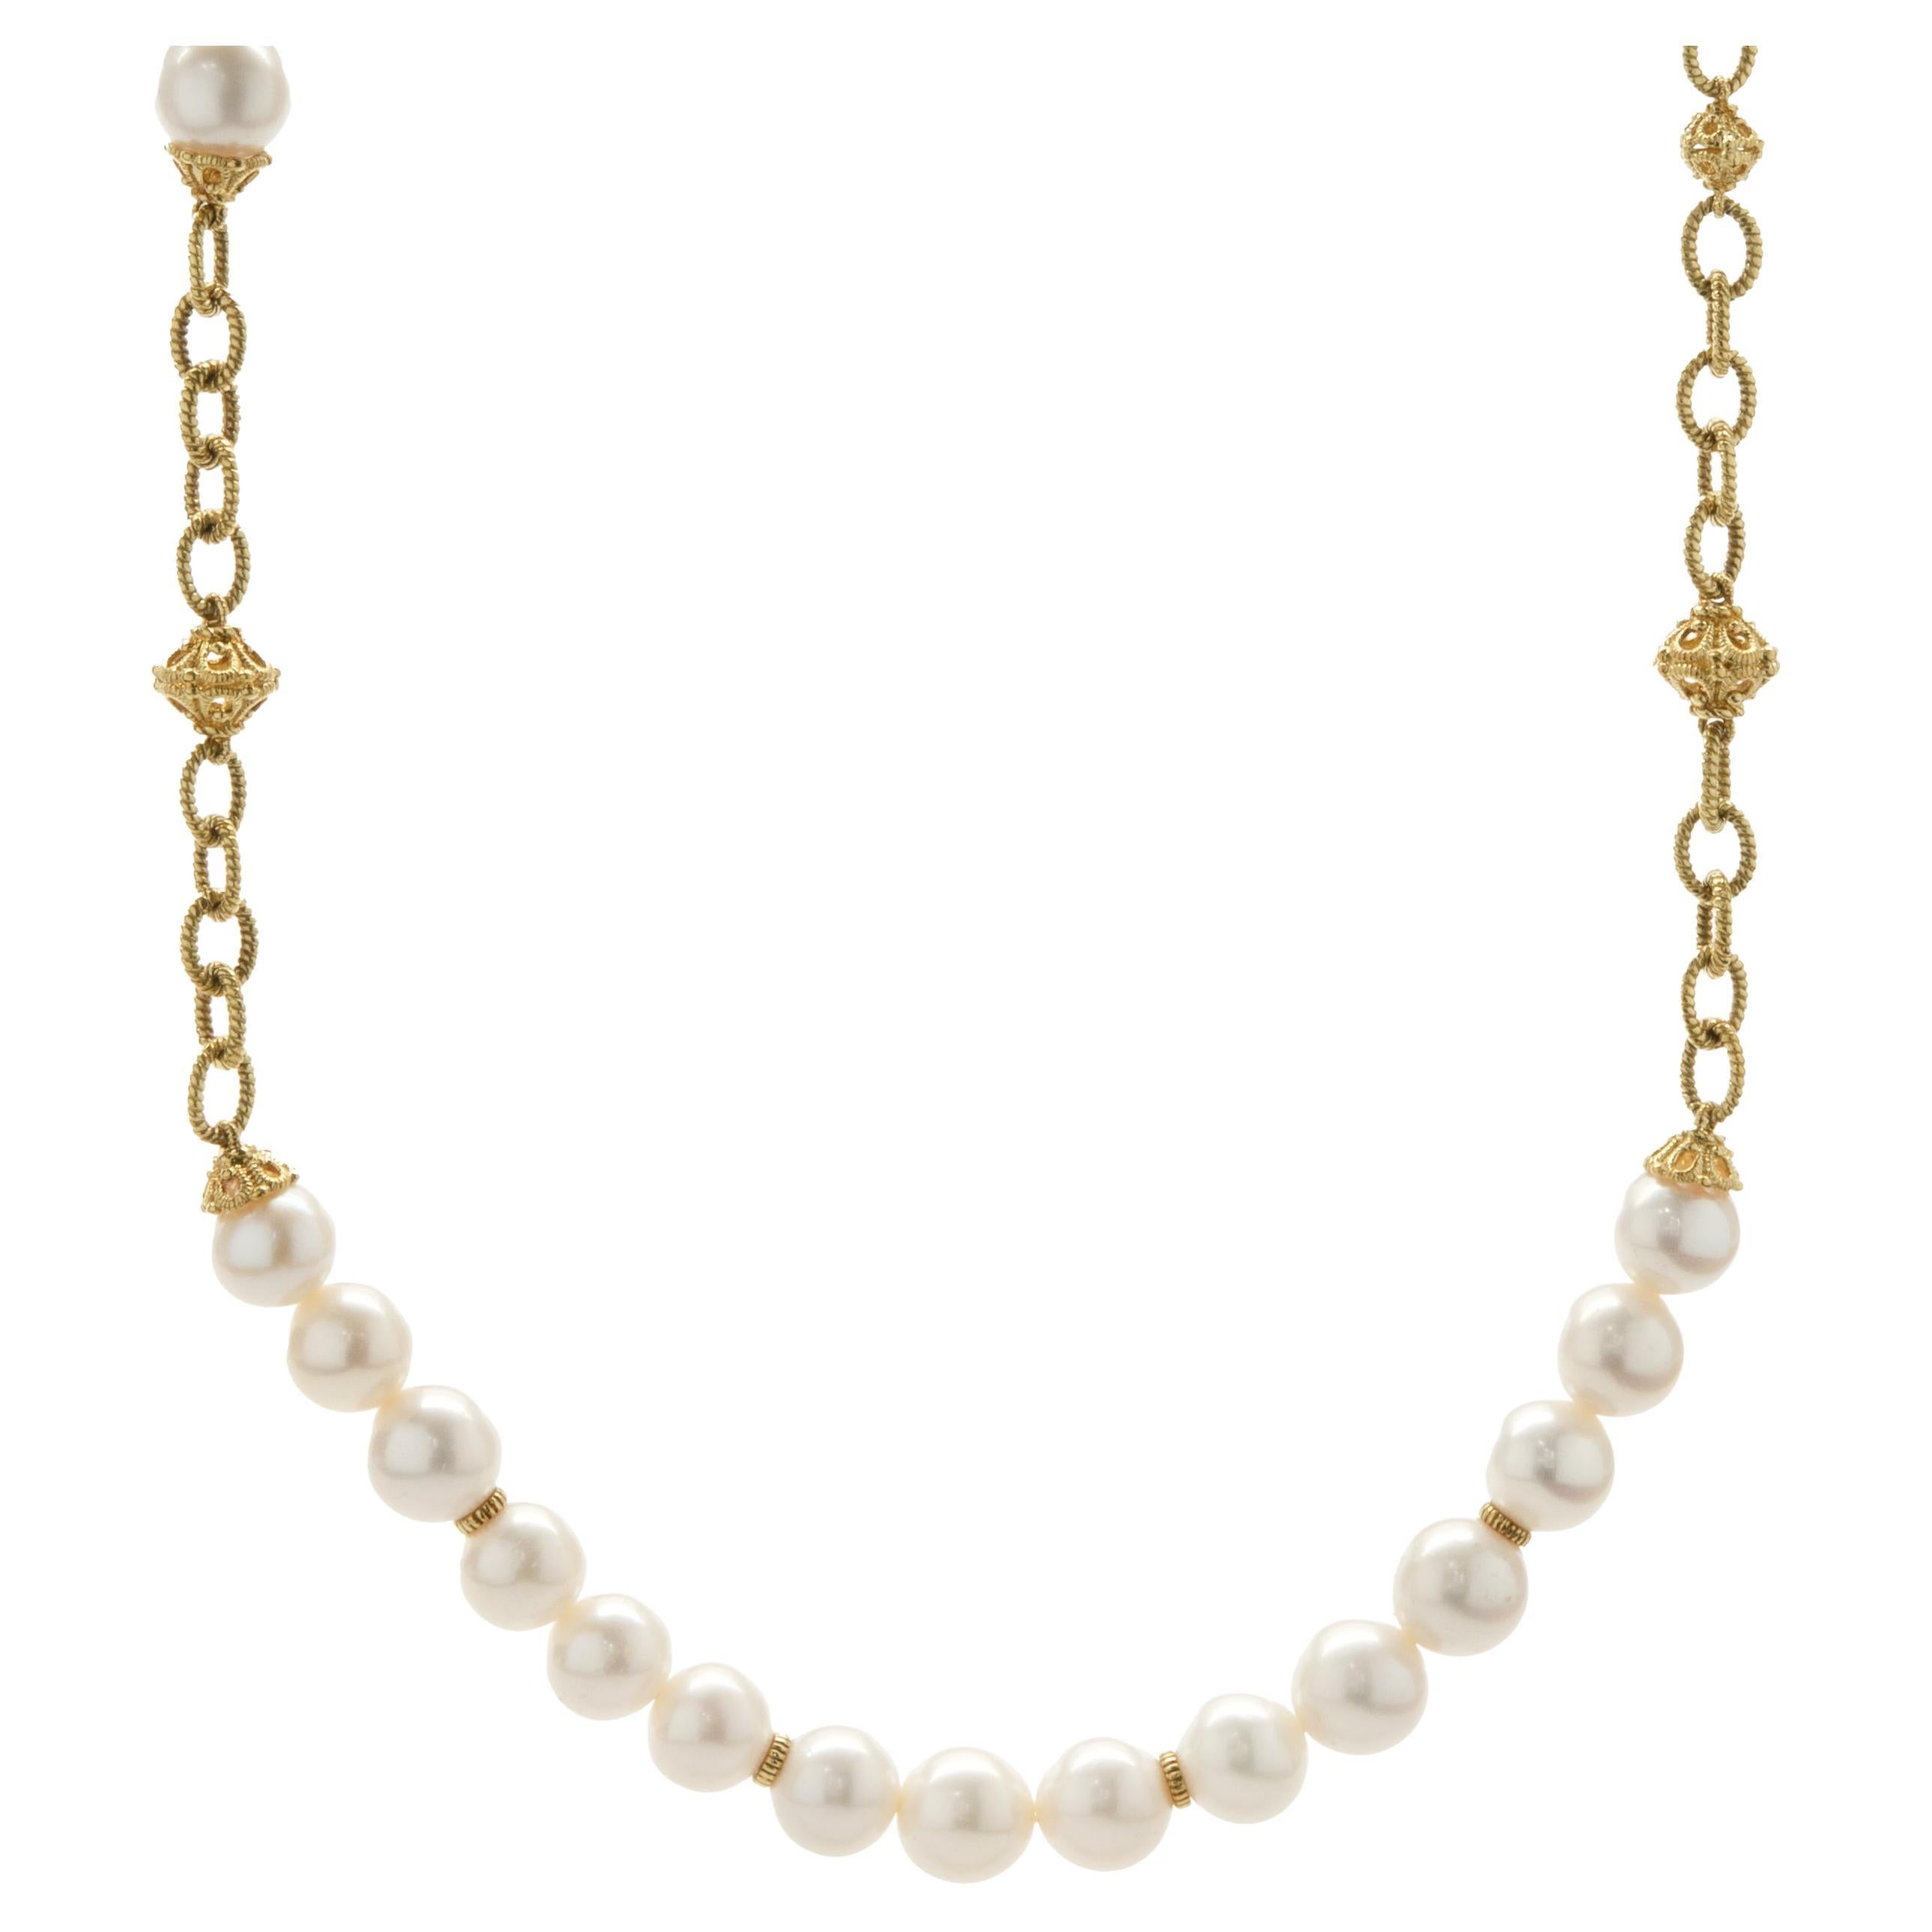 Judith Ripka 18 Karat Yellow Gold Pearl and Oval Link Station Necklace